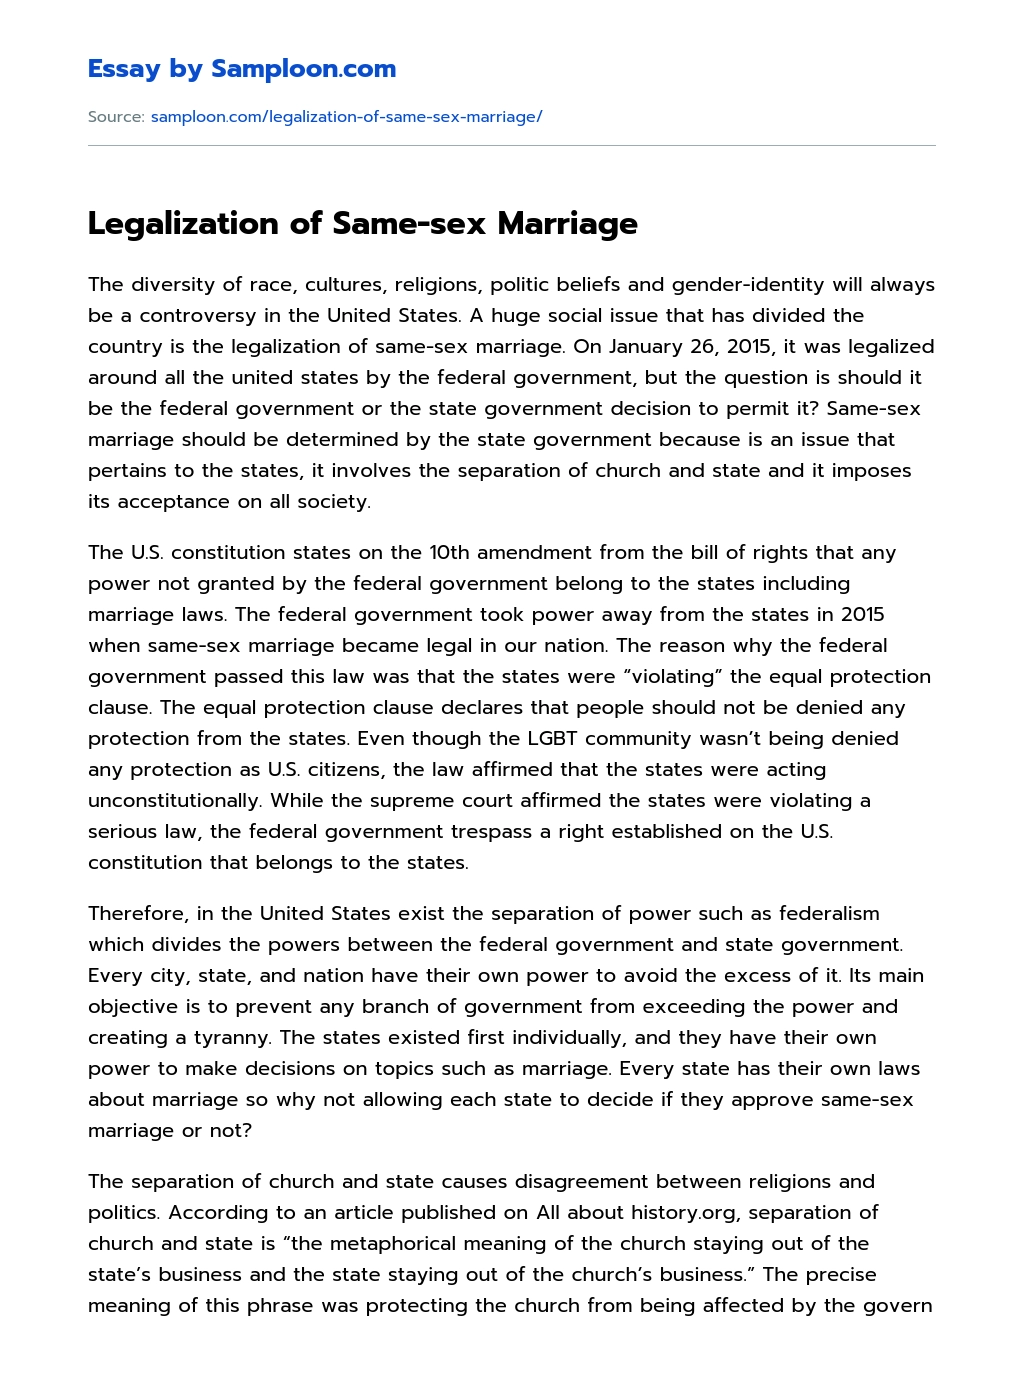 Legalization of Same-sex Marriage essay